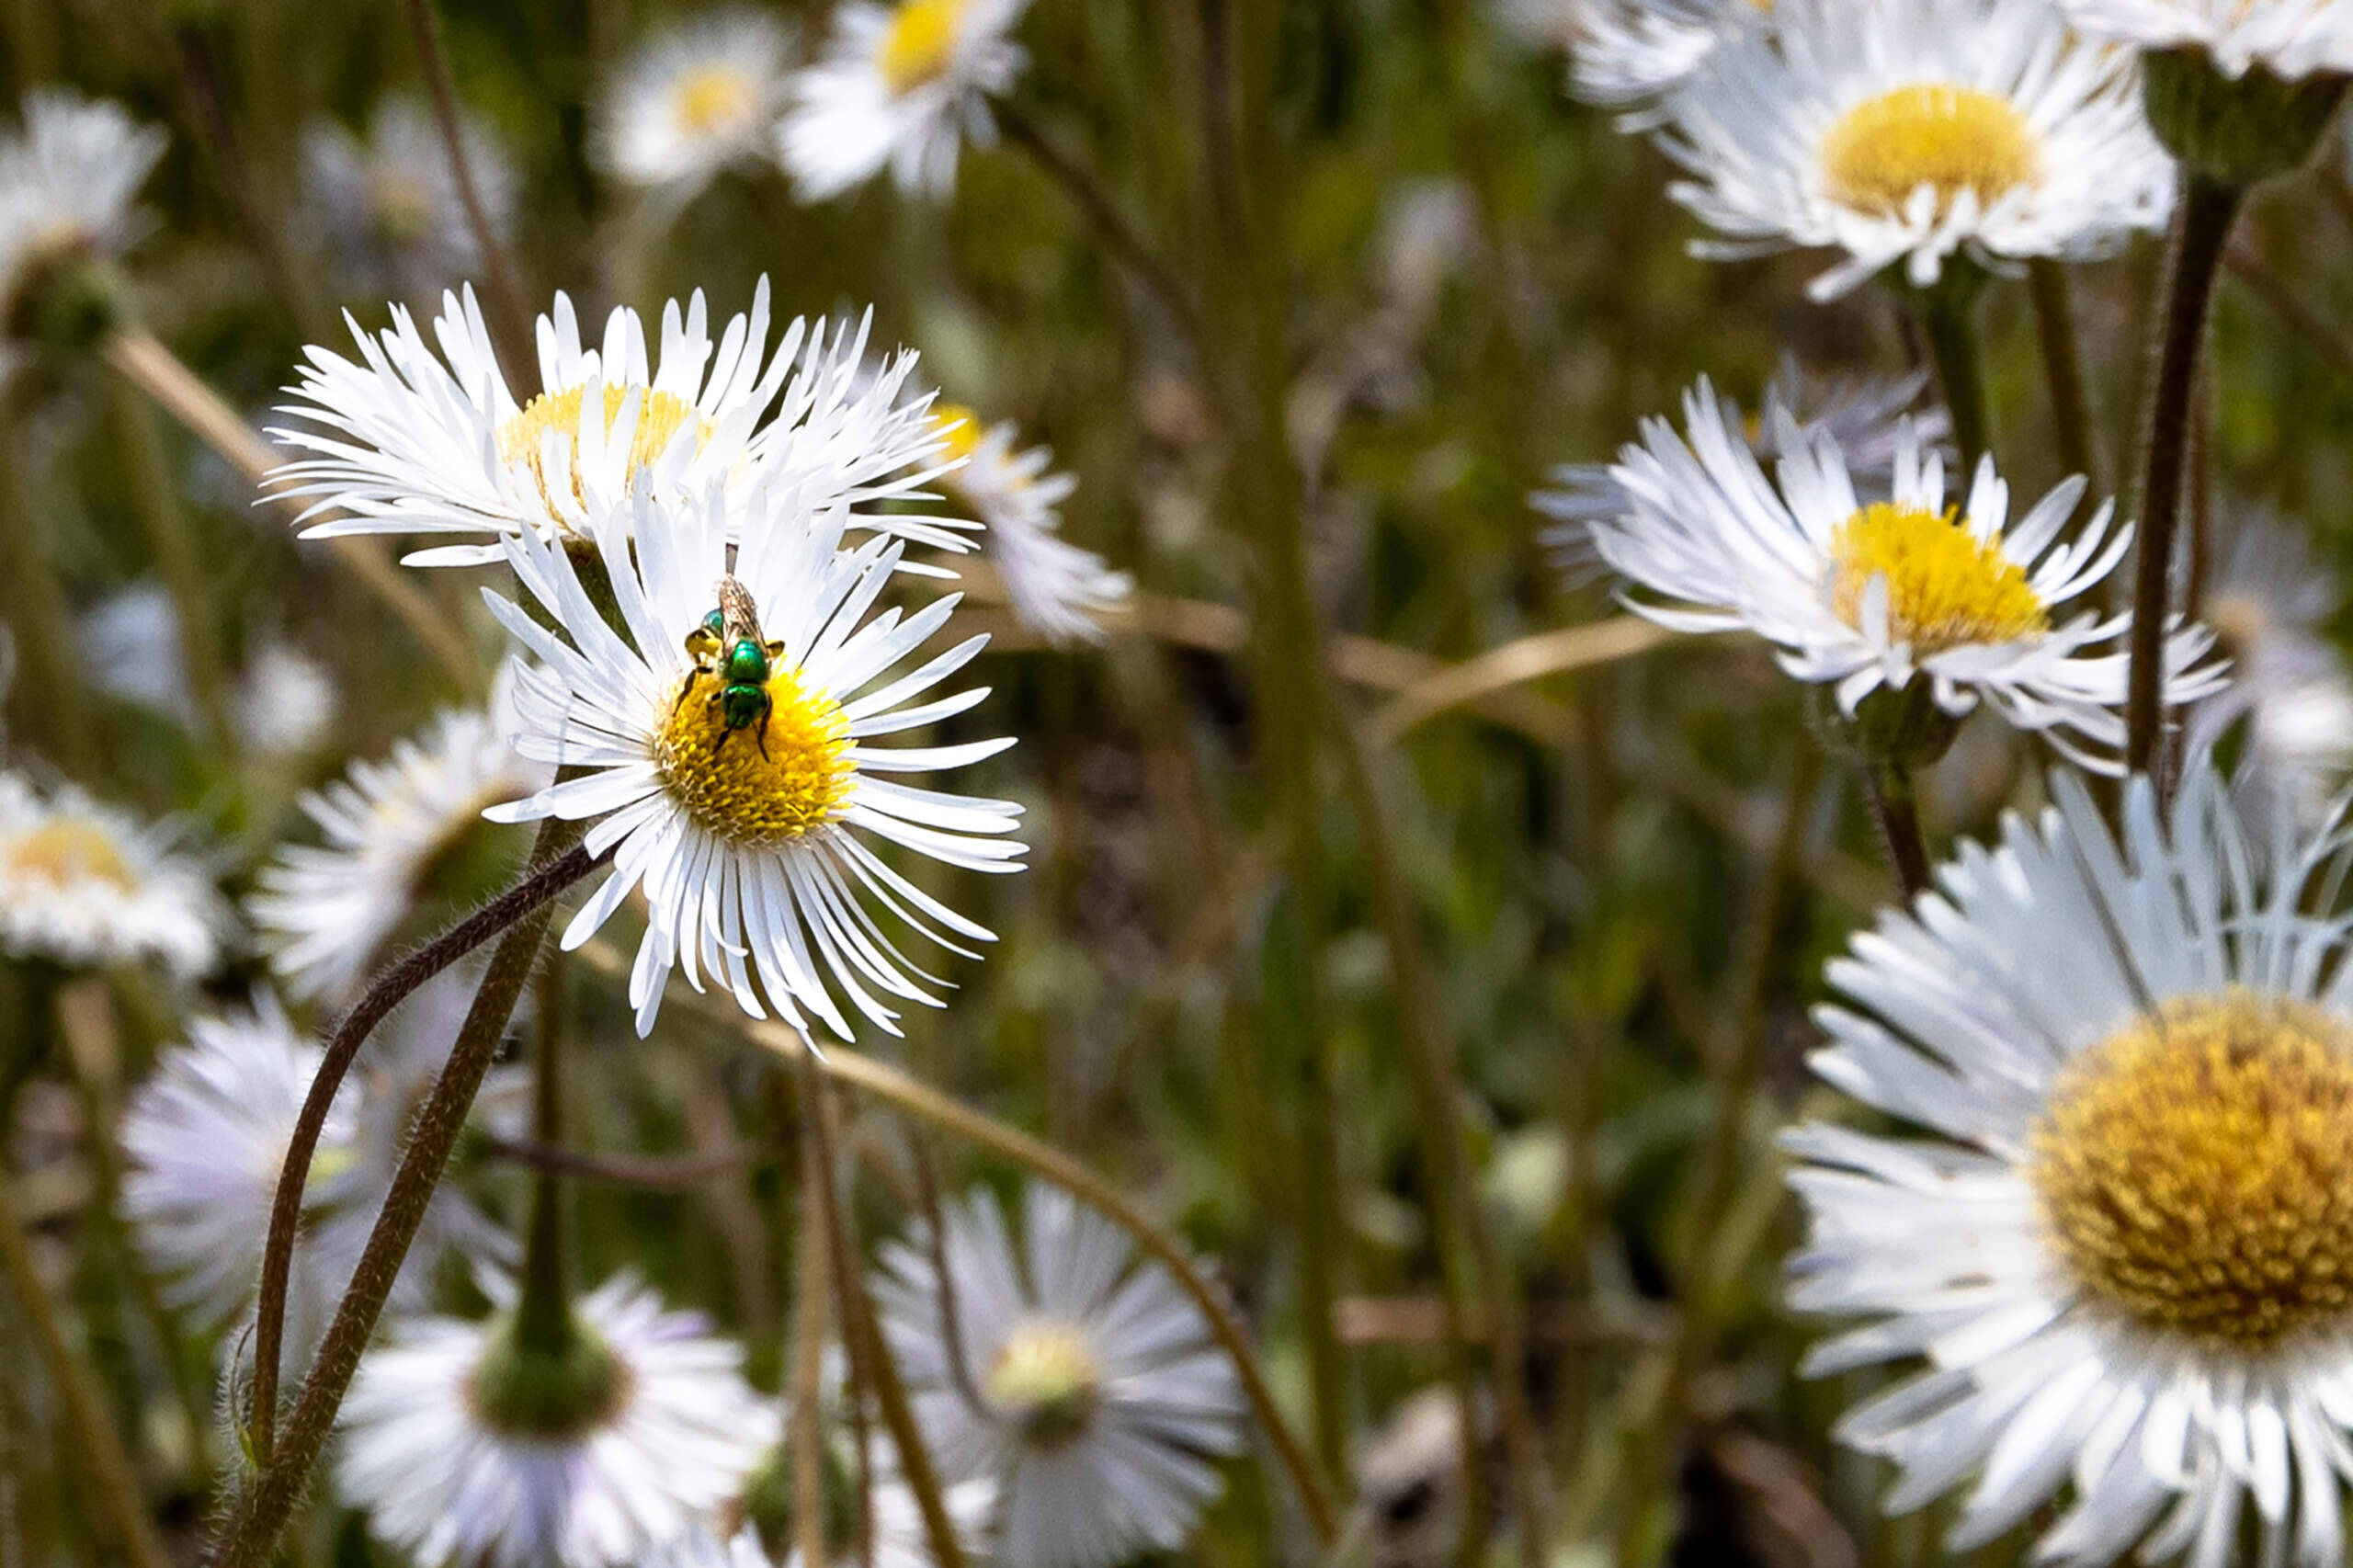 A sweat bee, a species native to Massachusetts, pollinates a flower in a bed of Robin’s Fleabane at the Mass Audubon's Broad Meadow Brook Conservation Center and Wildlife Sanctuary in Worcester. (Jesse Costa/WBUR)